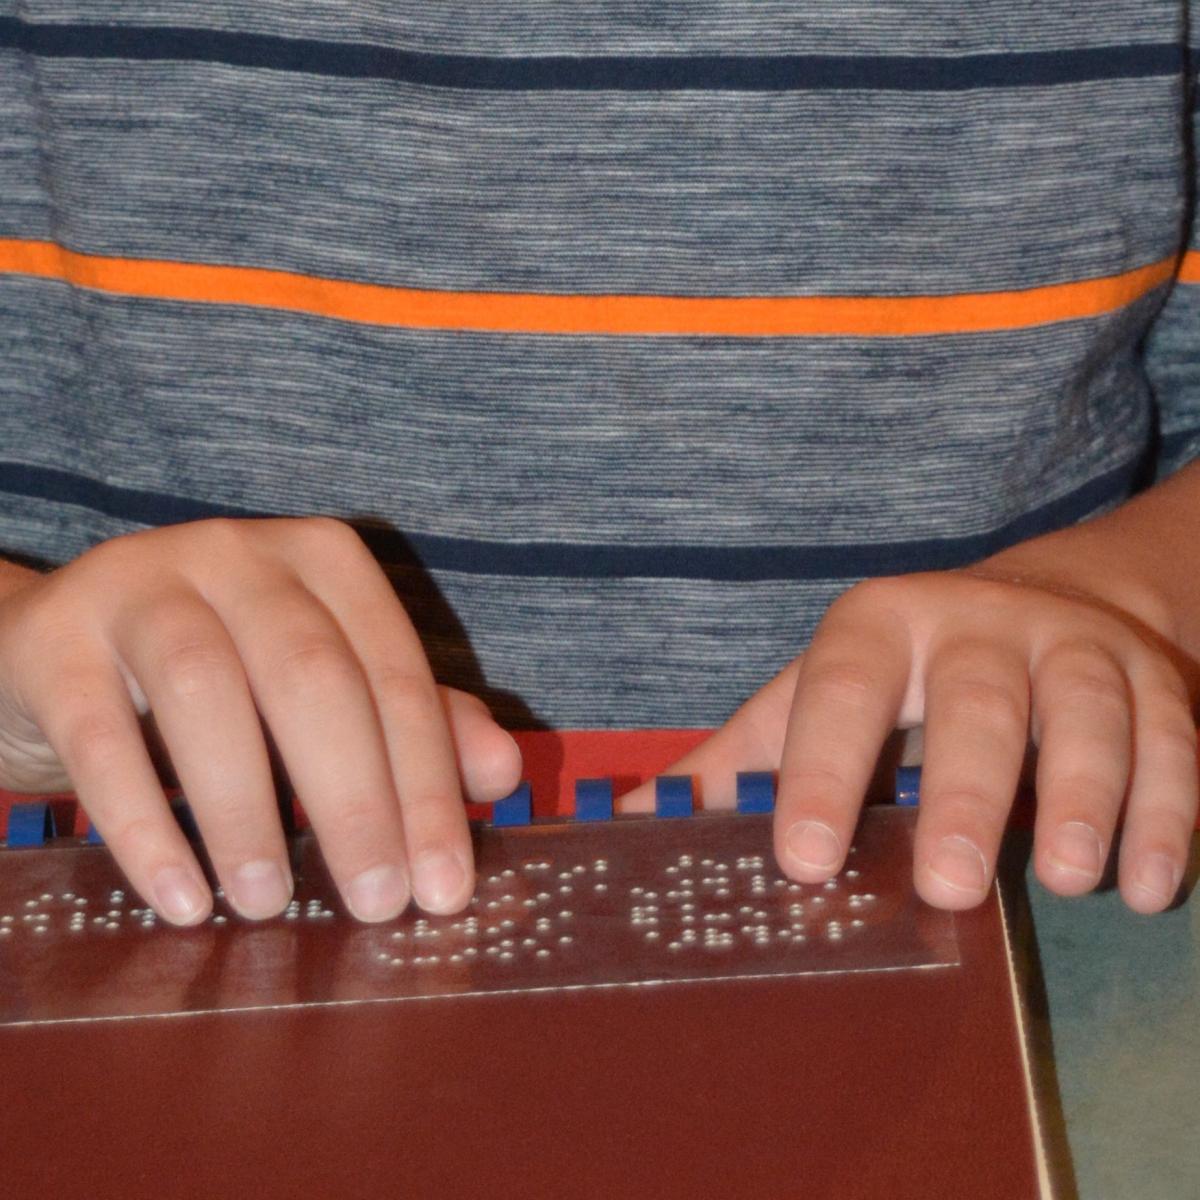 small child hands reading braille.